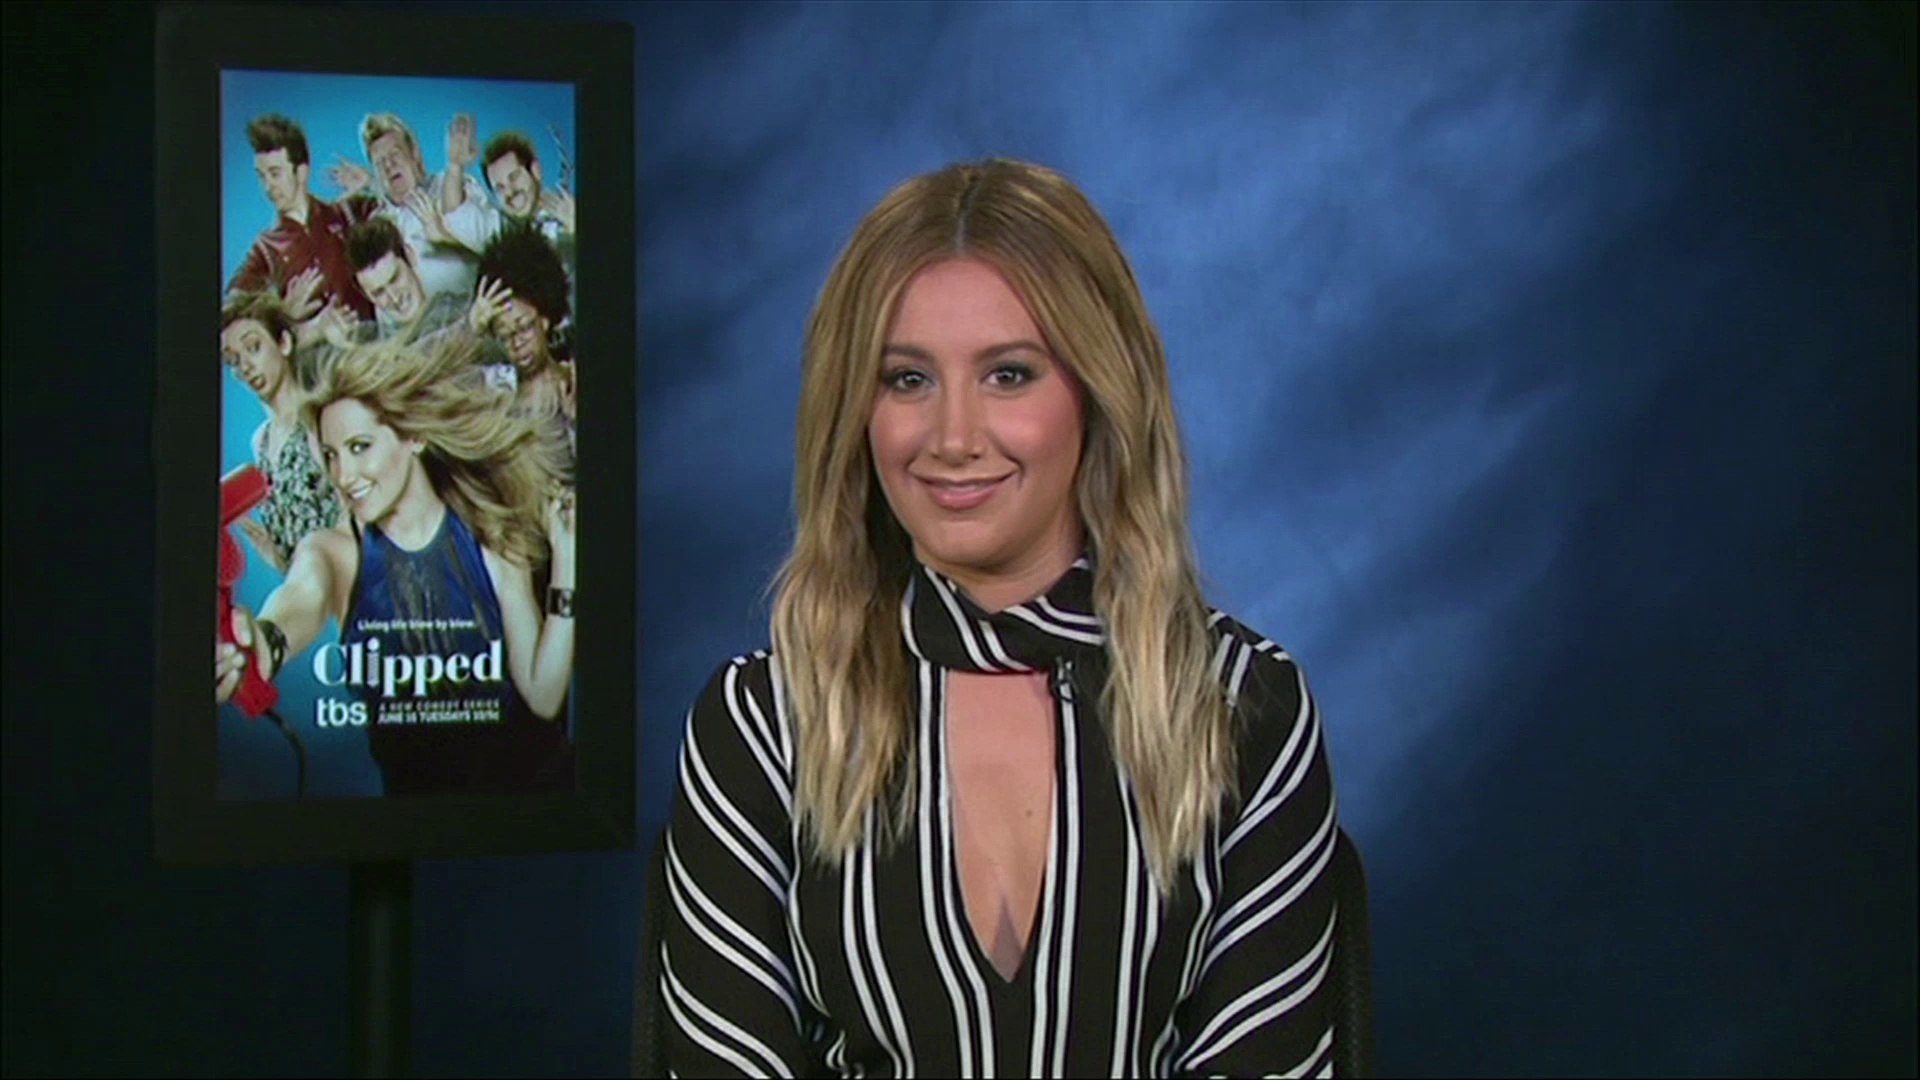 IR Interview: Ashley Tisdale For "Clipped" [TBS] - video Dailymotion